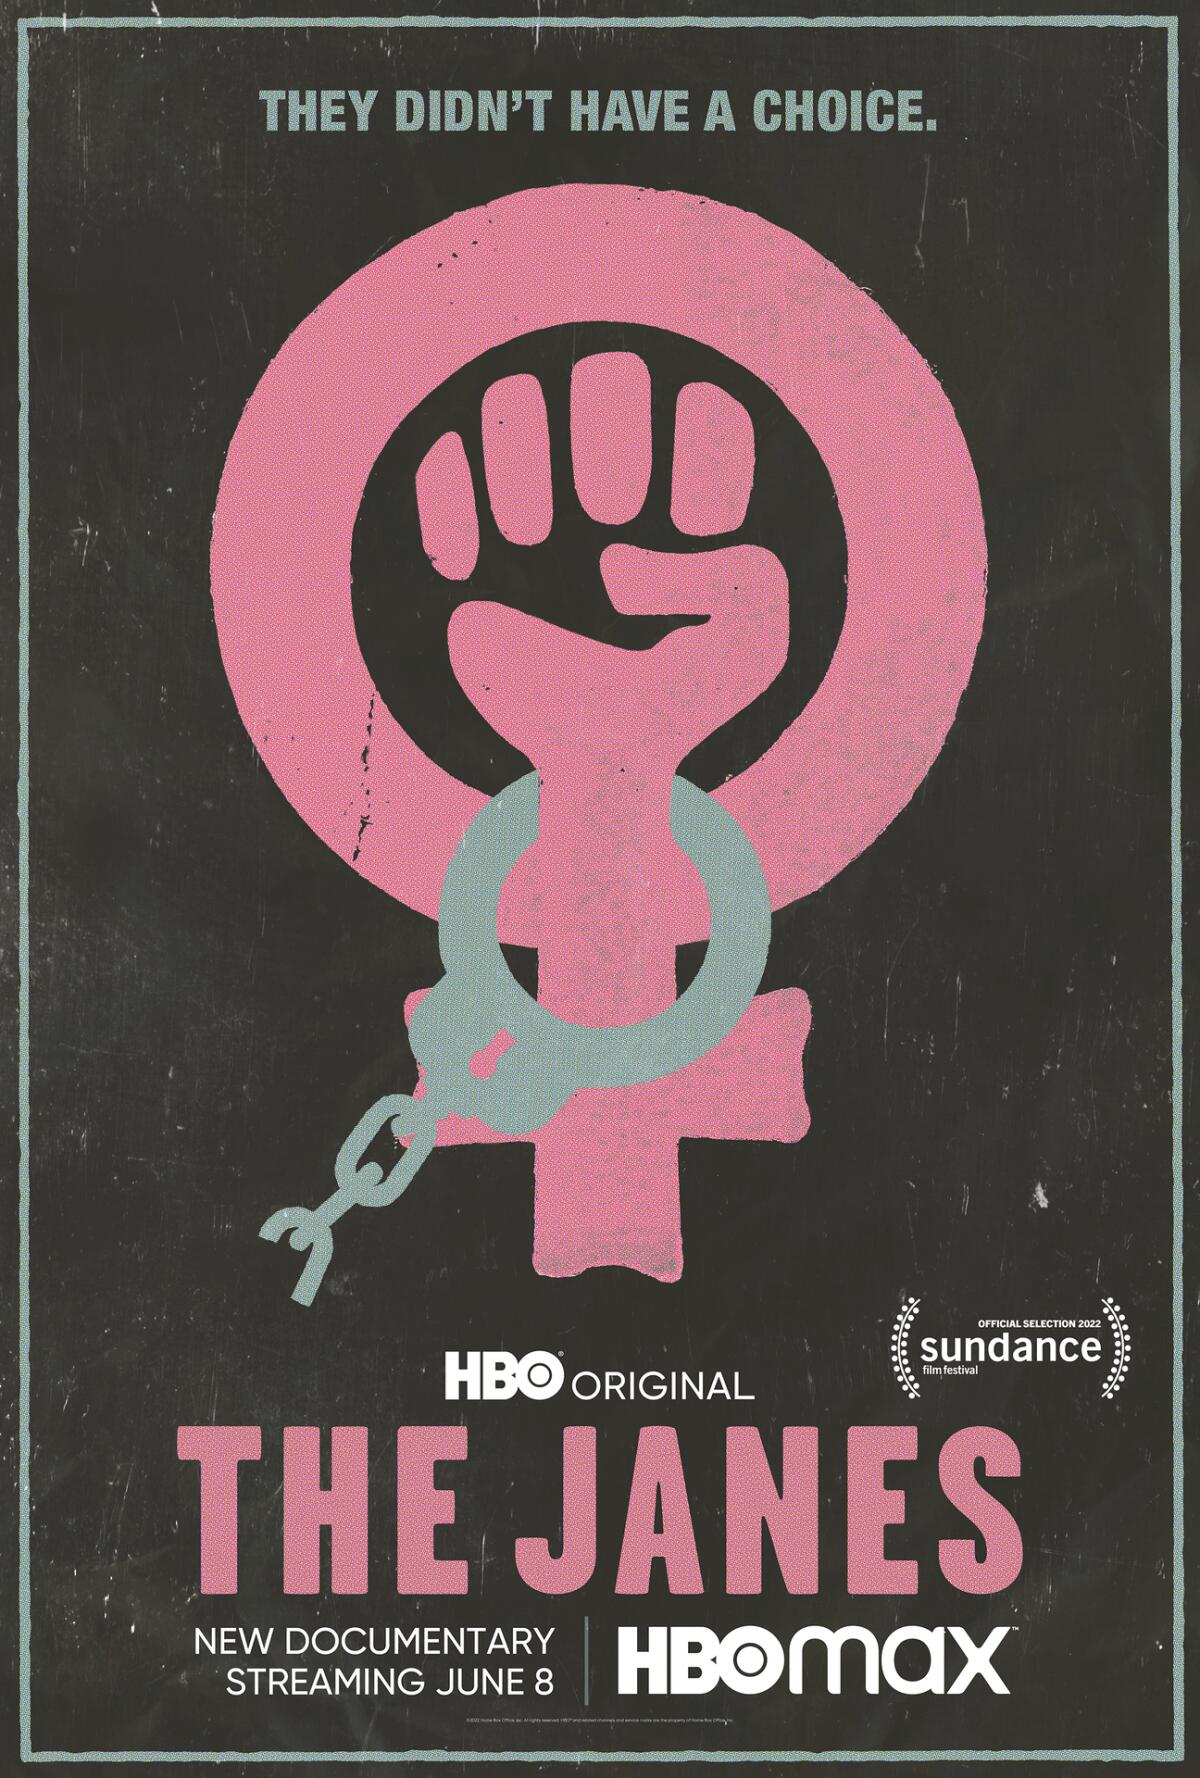 Promotional art for the documentary "The Janes."